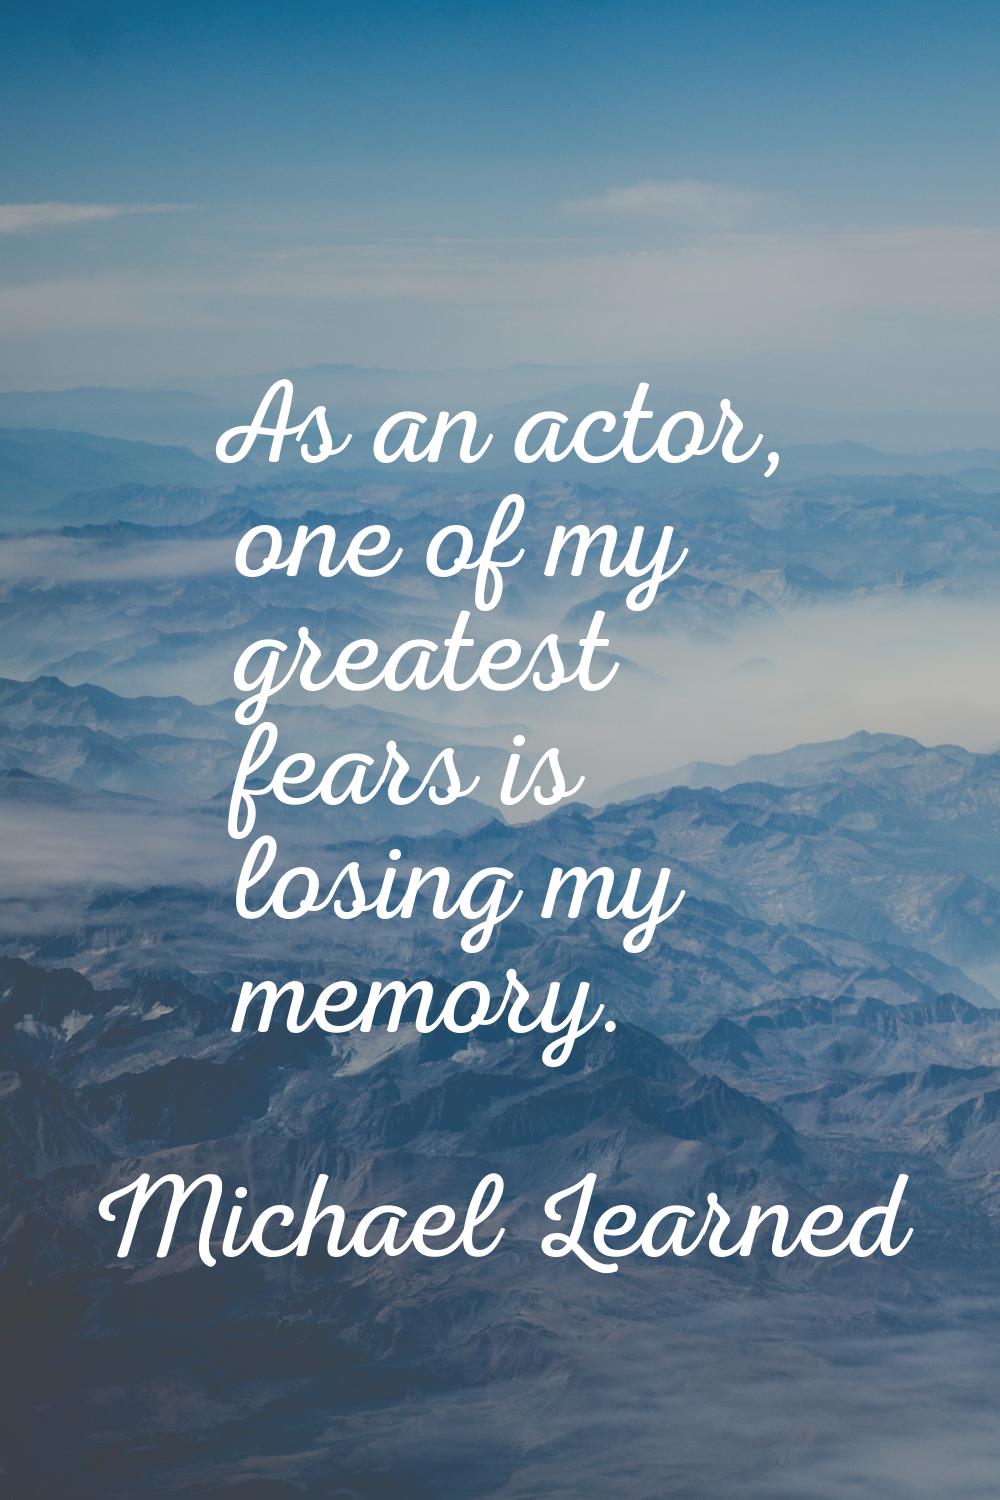 As an actor, one of my greatest fears is losing my memory.